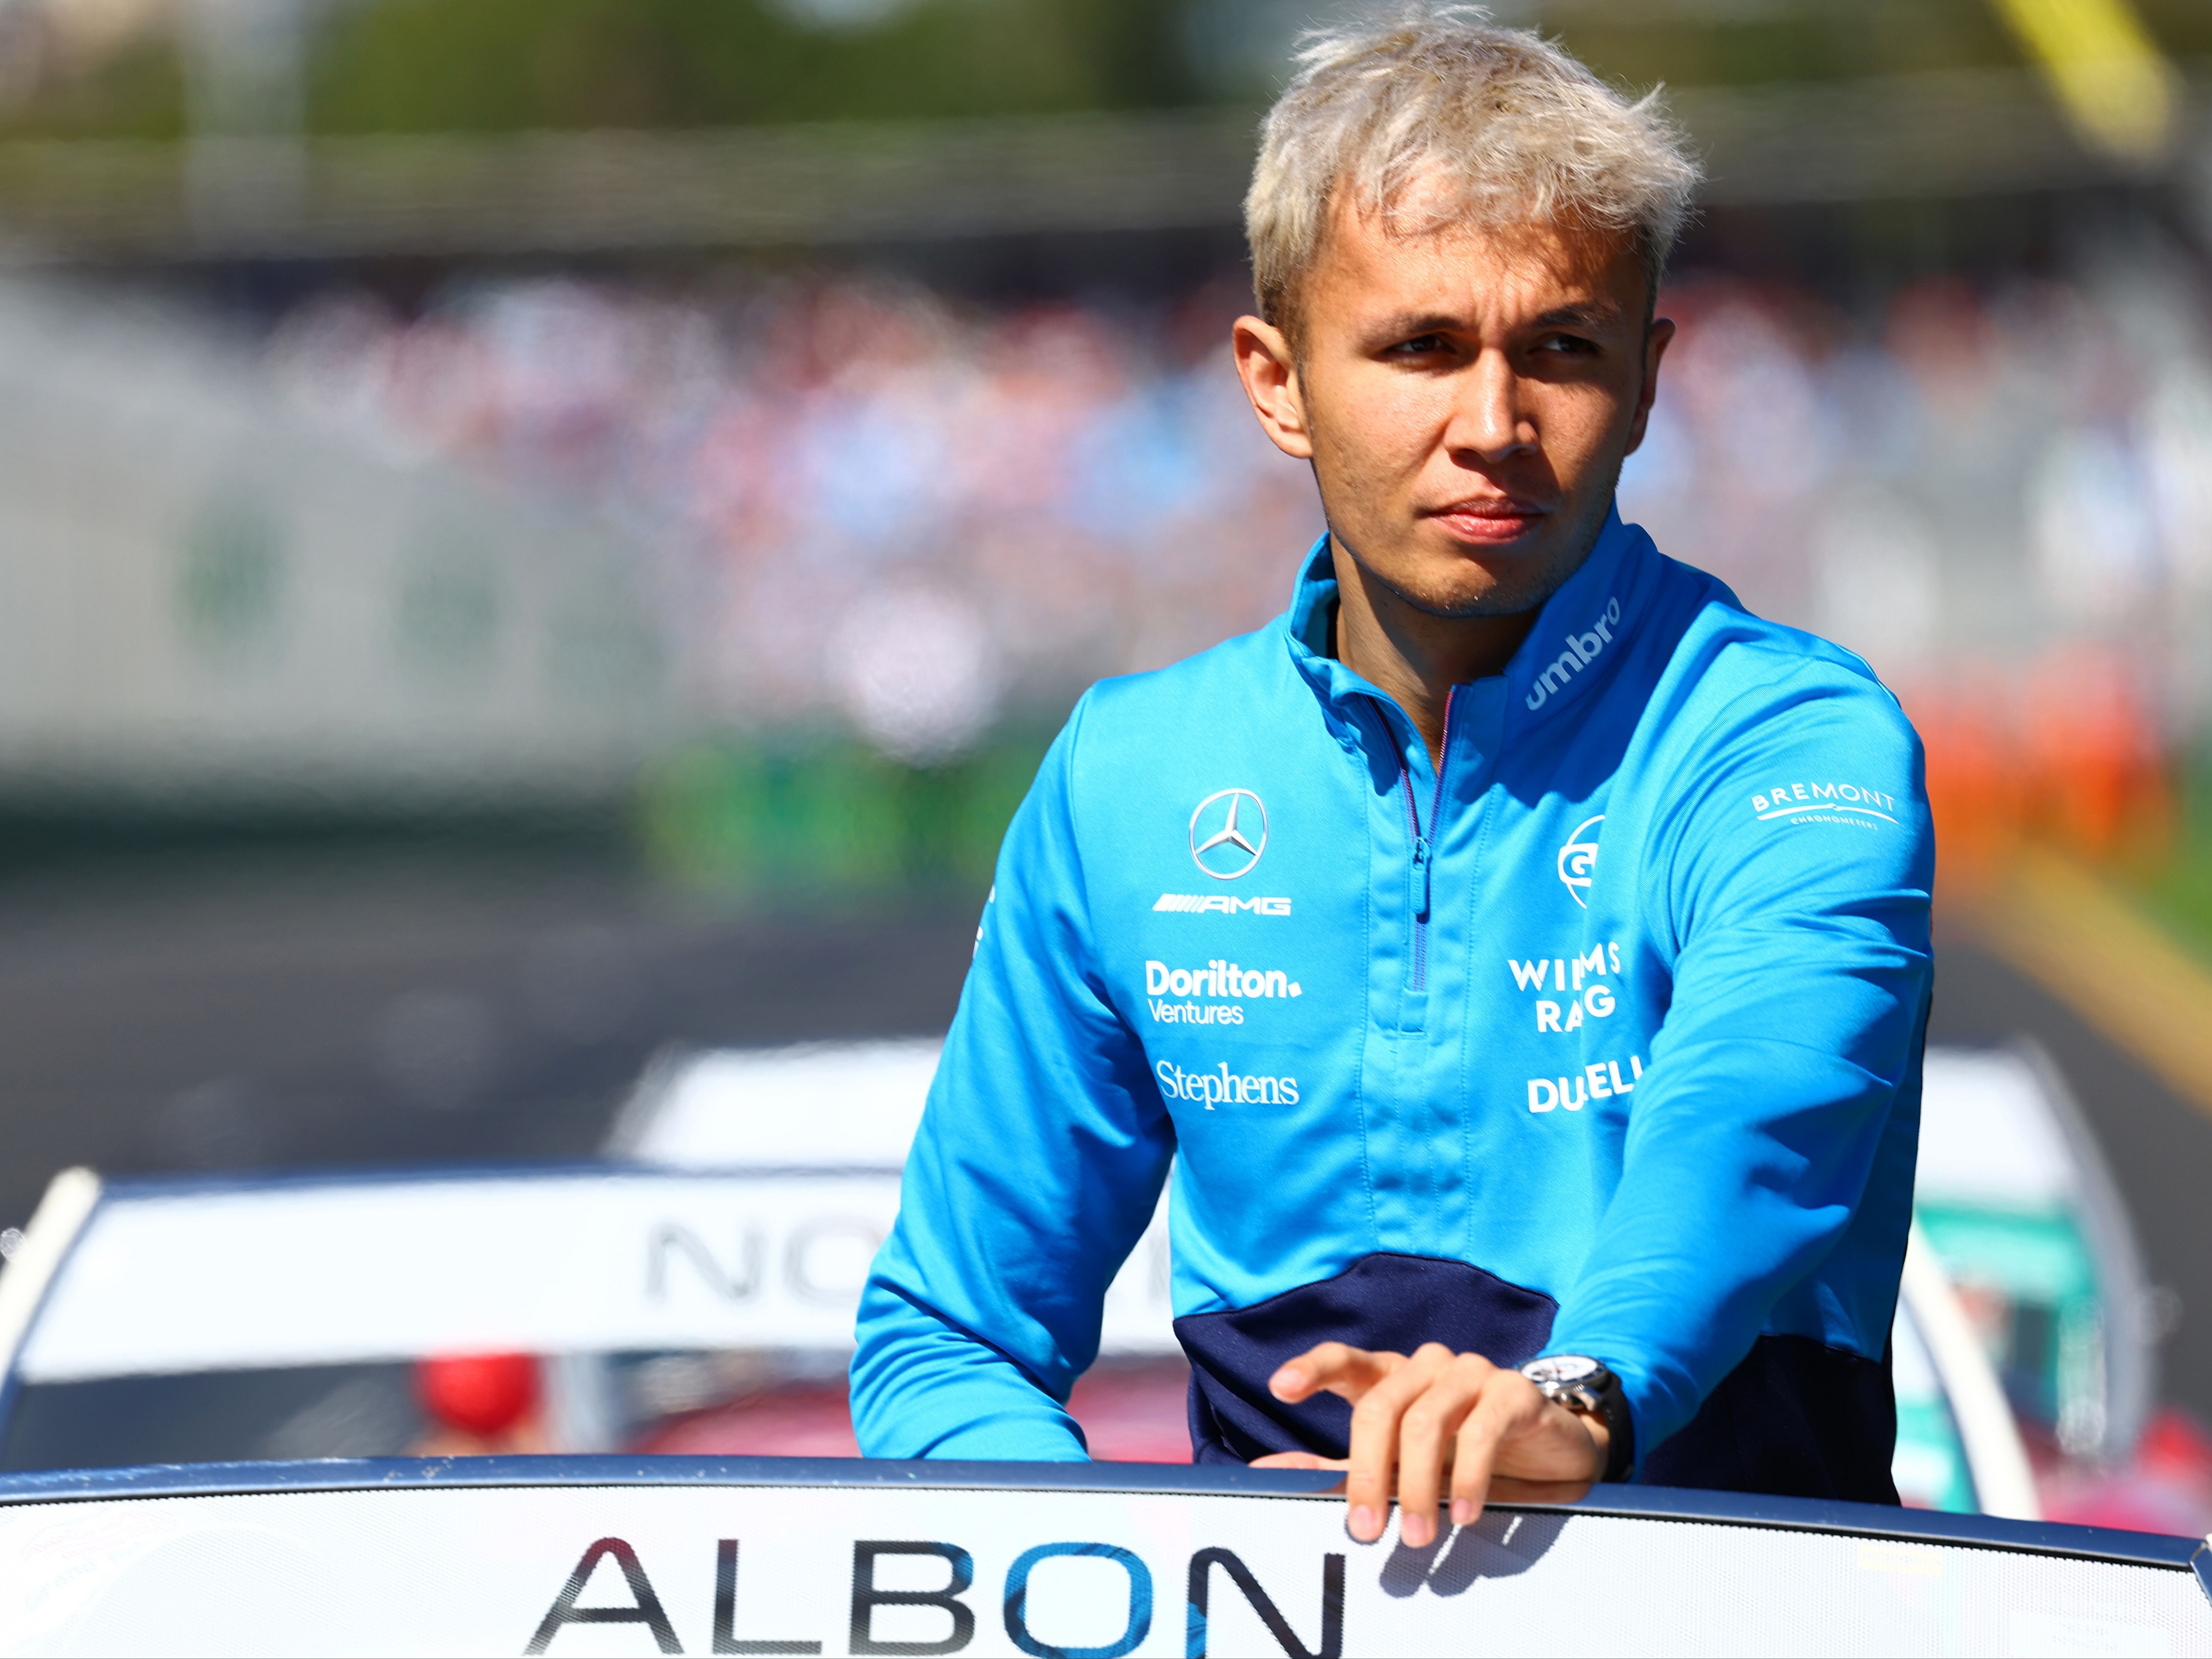 Alexander Albon looks on from the drivers parade prior to the 2023 F1 Australian Grand Prix (Photo by Mark Thompson/Getty Images)